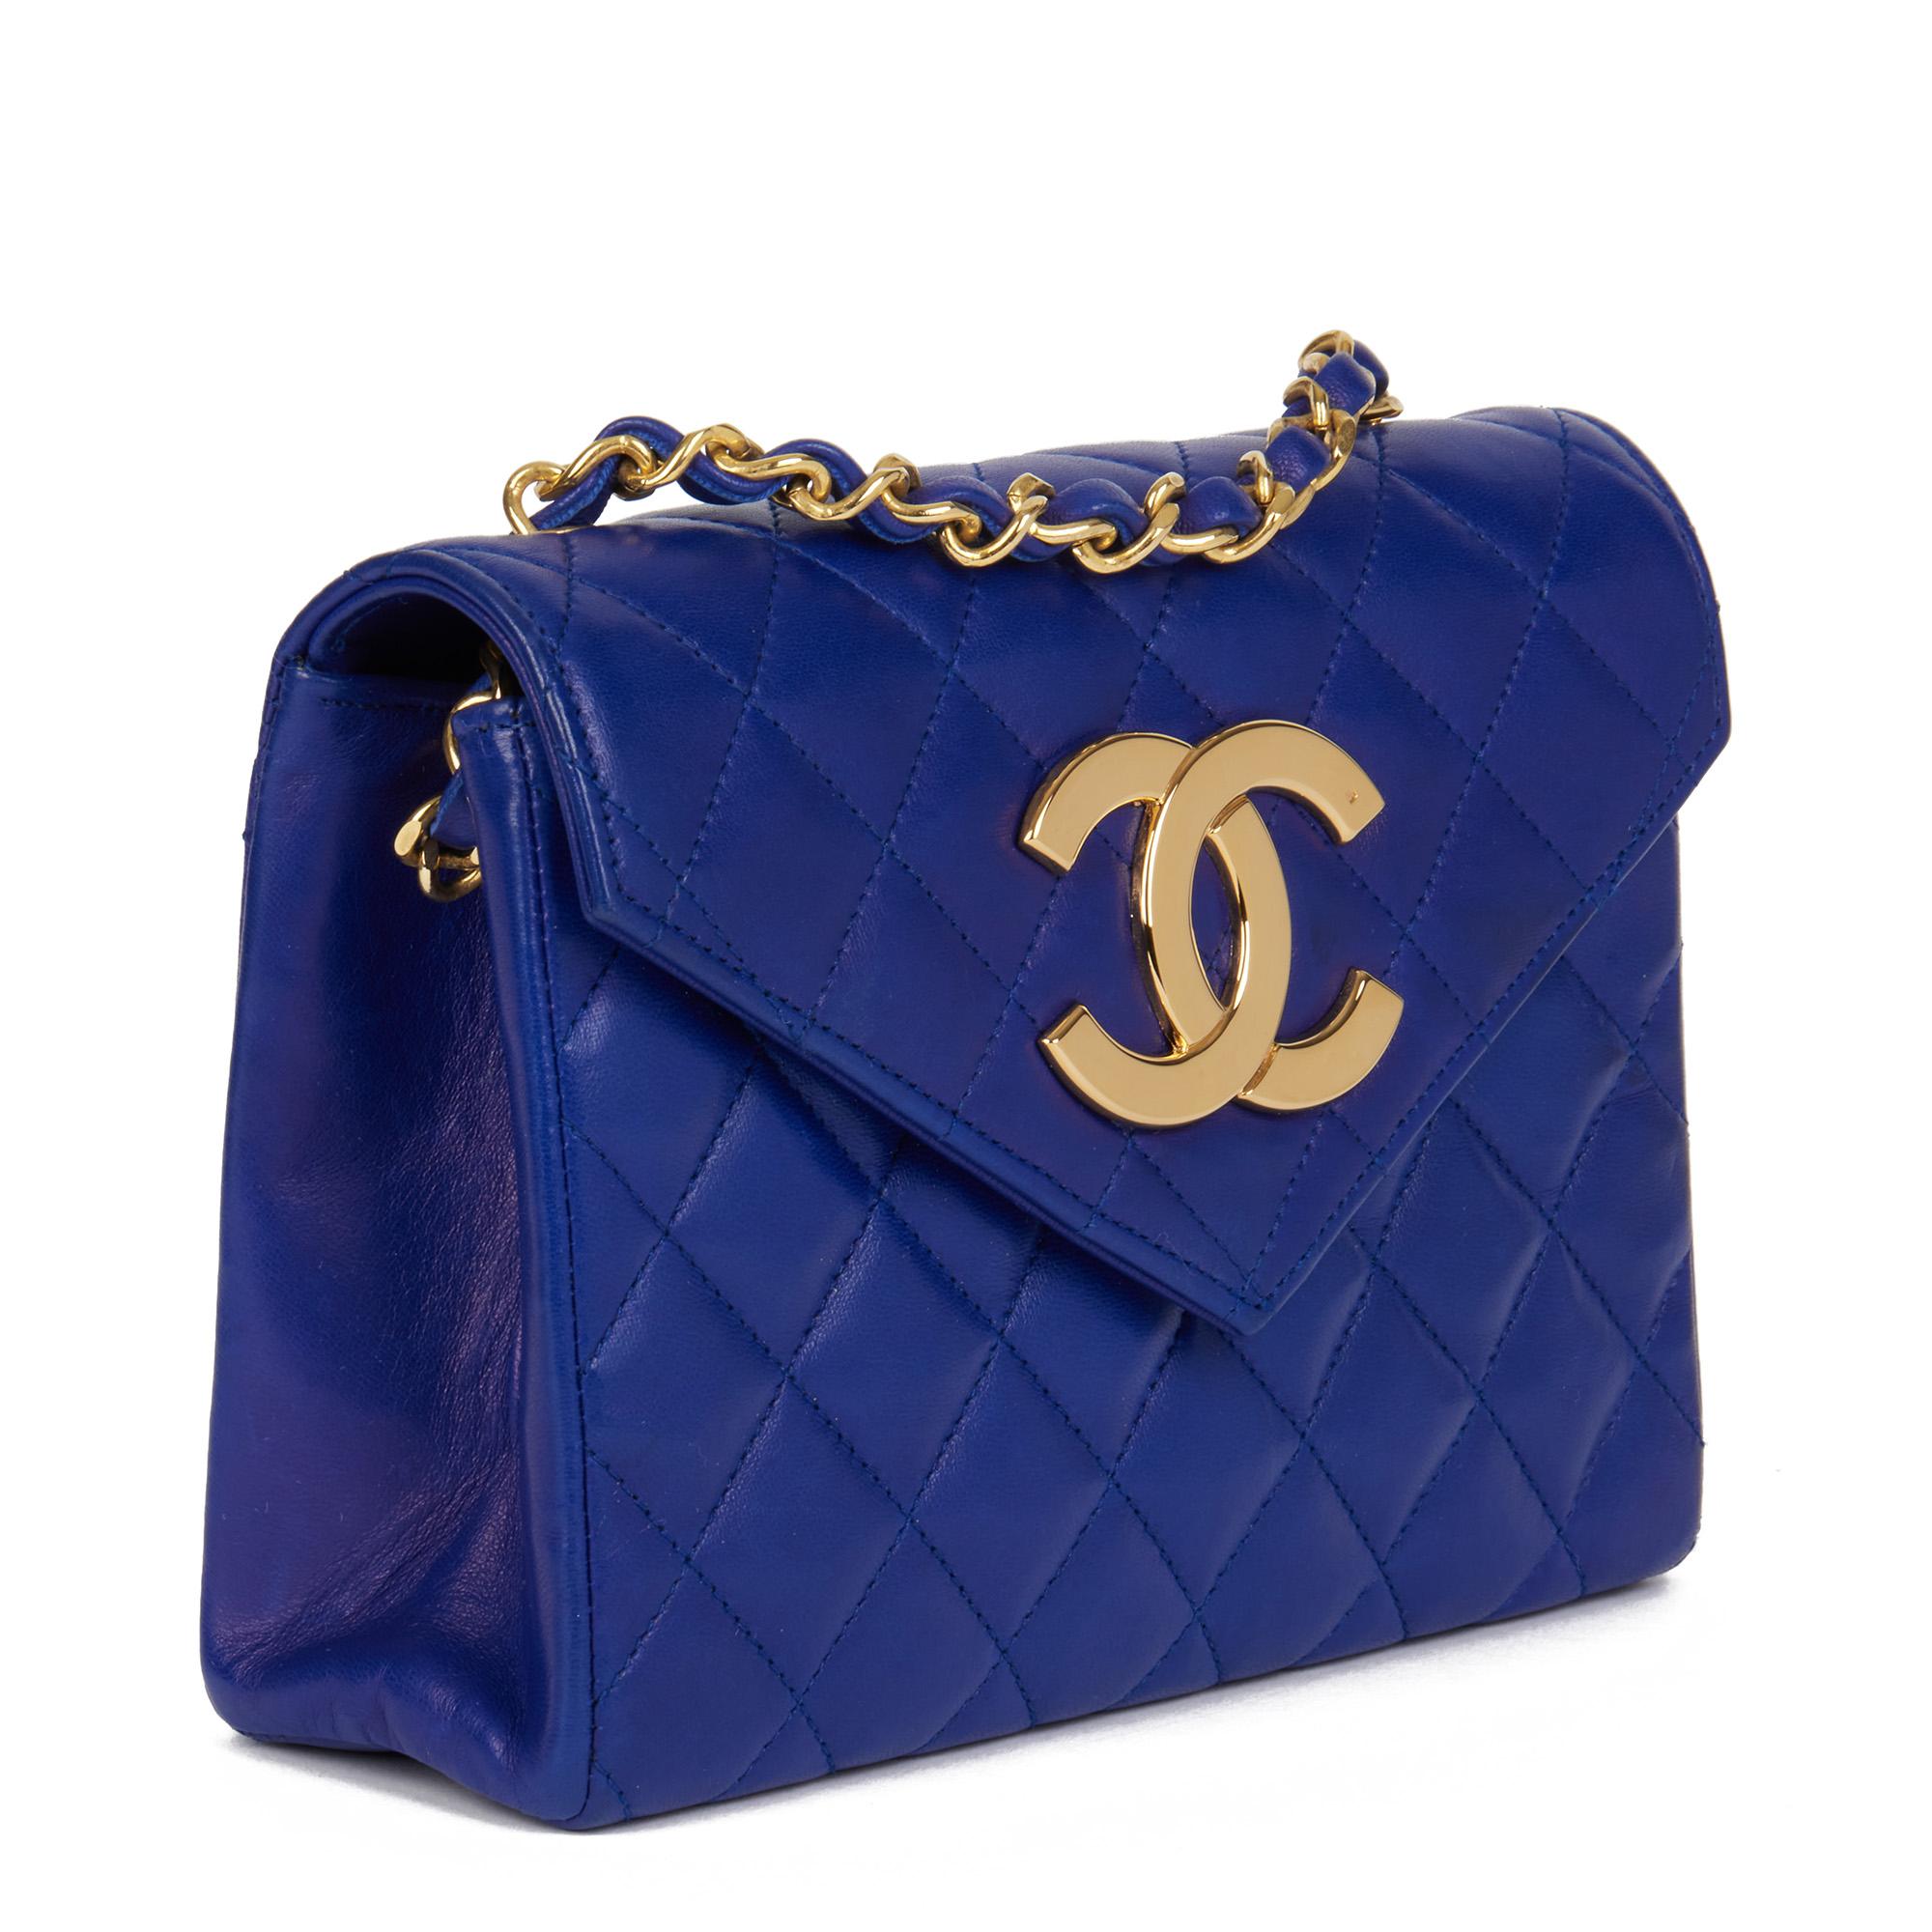 CHANEL
Electric Blue Quilted Lambskin Vintage XL Mini Flap Bag

Serial Number: 1055559
Age (Circa): 1989
Accompanied By: Chanel Dust Bag, Box, Authenticity Card
Authenticity Details: Authenticity Card, Serial Sticker (Made in France)
Gender: